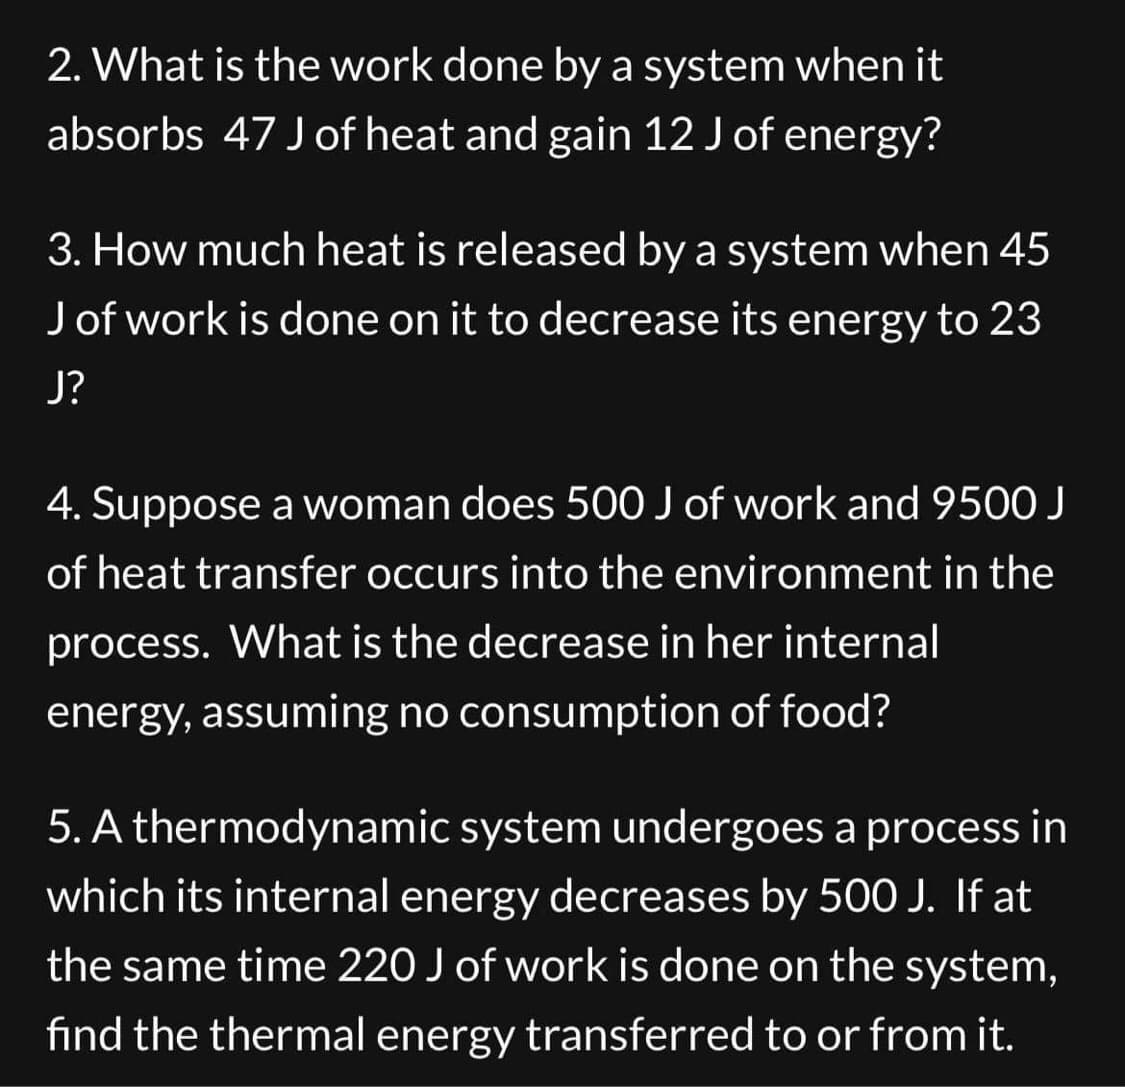 2. What is the work done by a system when it
absorbs 47 J of heat and gain 12 J of energy?
3. How much heat is released by a system when 45
J of work is done on it to decrease its energy to 23
J?
4. Suppose a woman does 500 J of work and 9500 J
of heat transfer occurs into the environment in the
process. What is the decrease in her internal
energy, assuming no consumption of food?
5. A thermodynamic system undergoes a process in
which its internal energy decreases by 500 J. If at
the same time 220 J of work is done on the system,
find the thermal energy transferred to or from it.